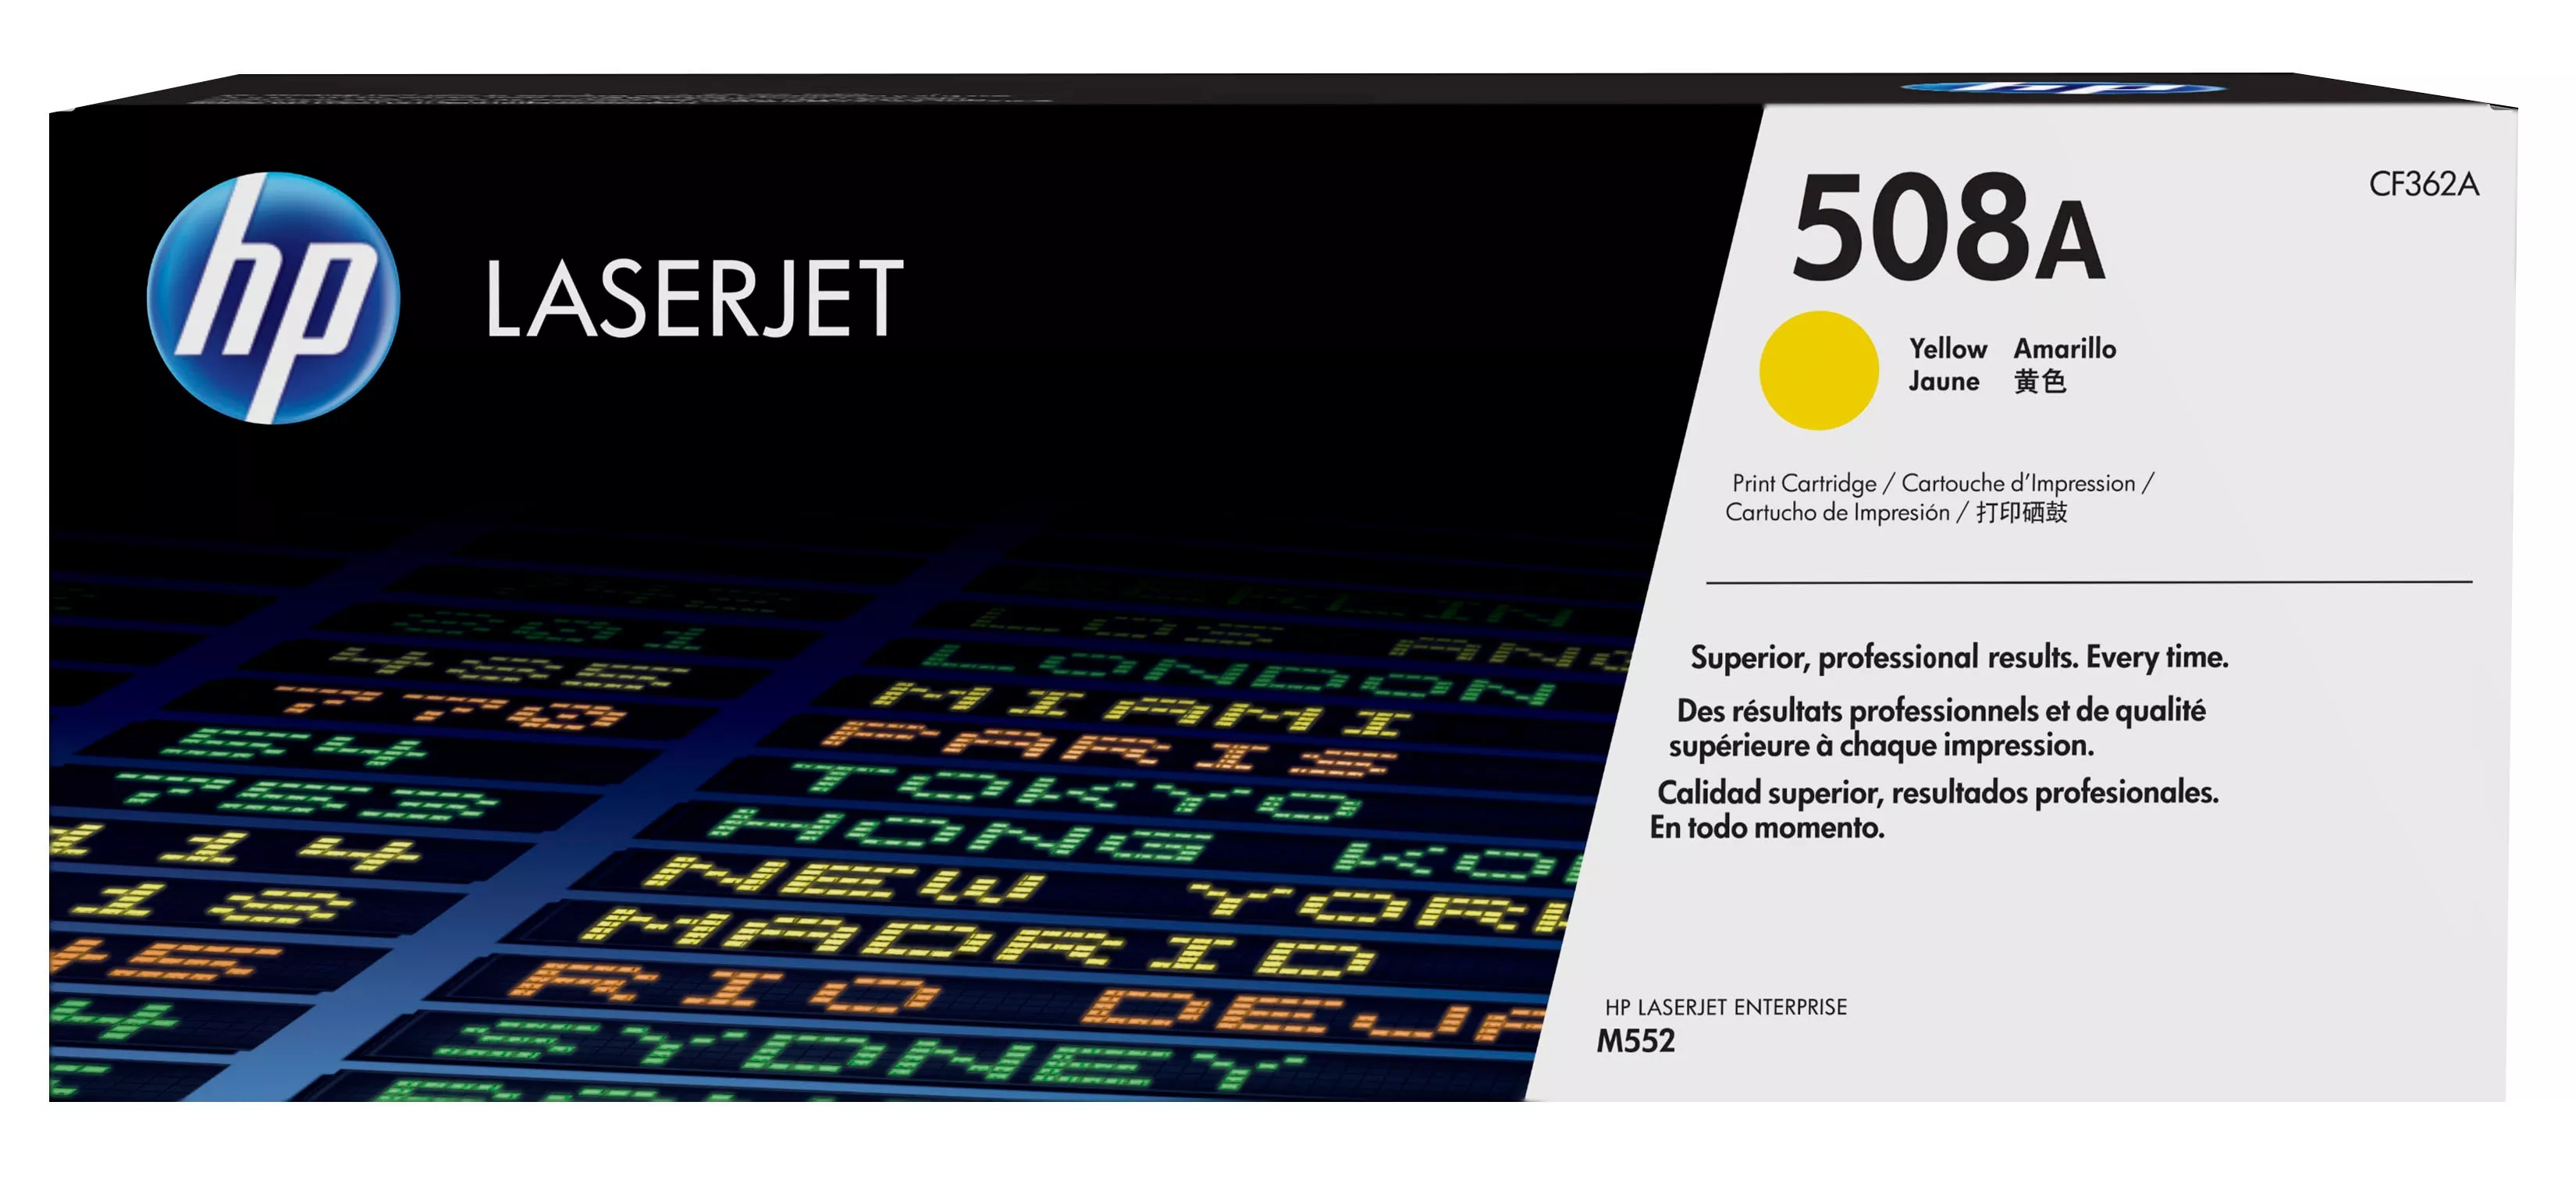 Achat HP 508A original Toner cartridge CF362A yellow 5.000 pages - 0888793237588